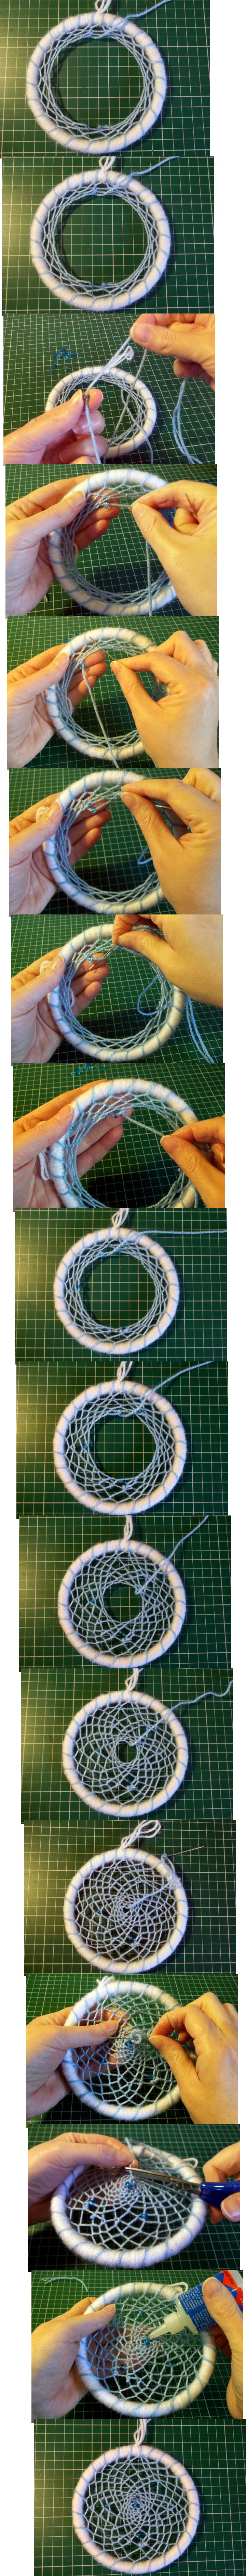 Things to make and do - Dream Catcher 